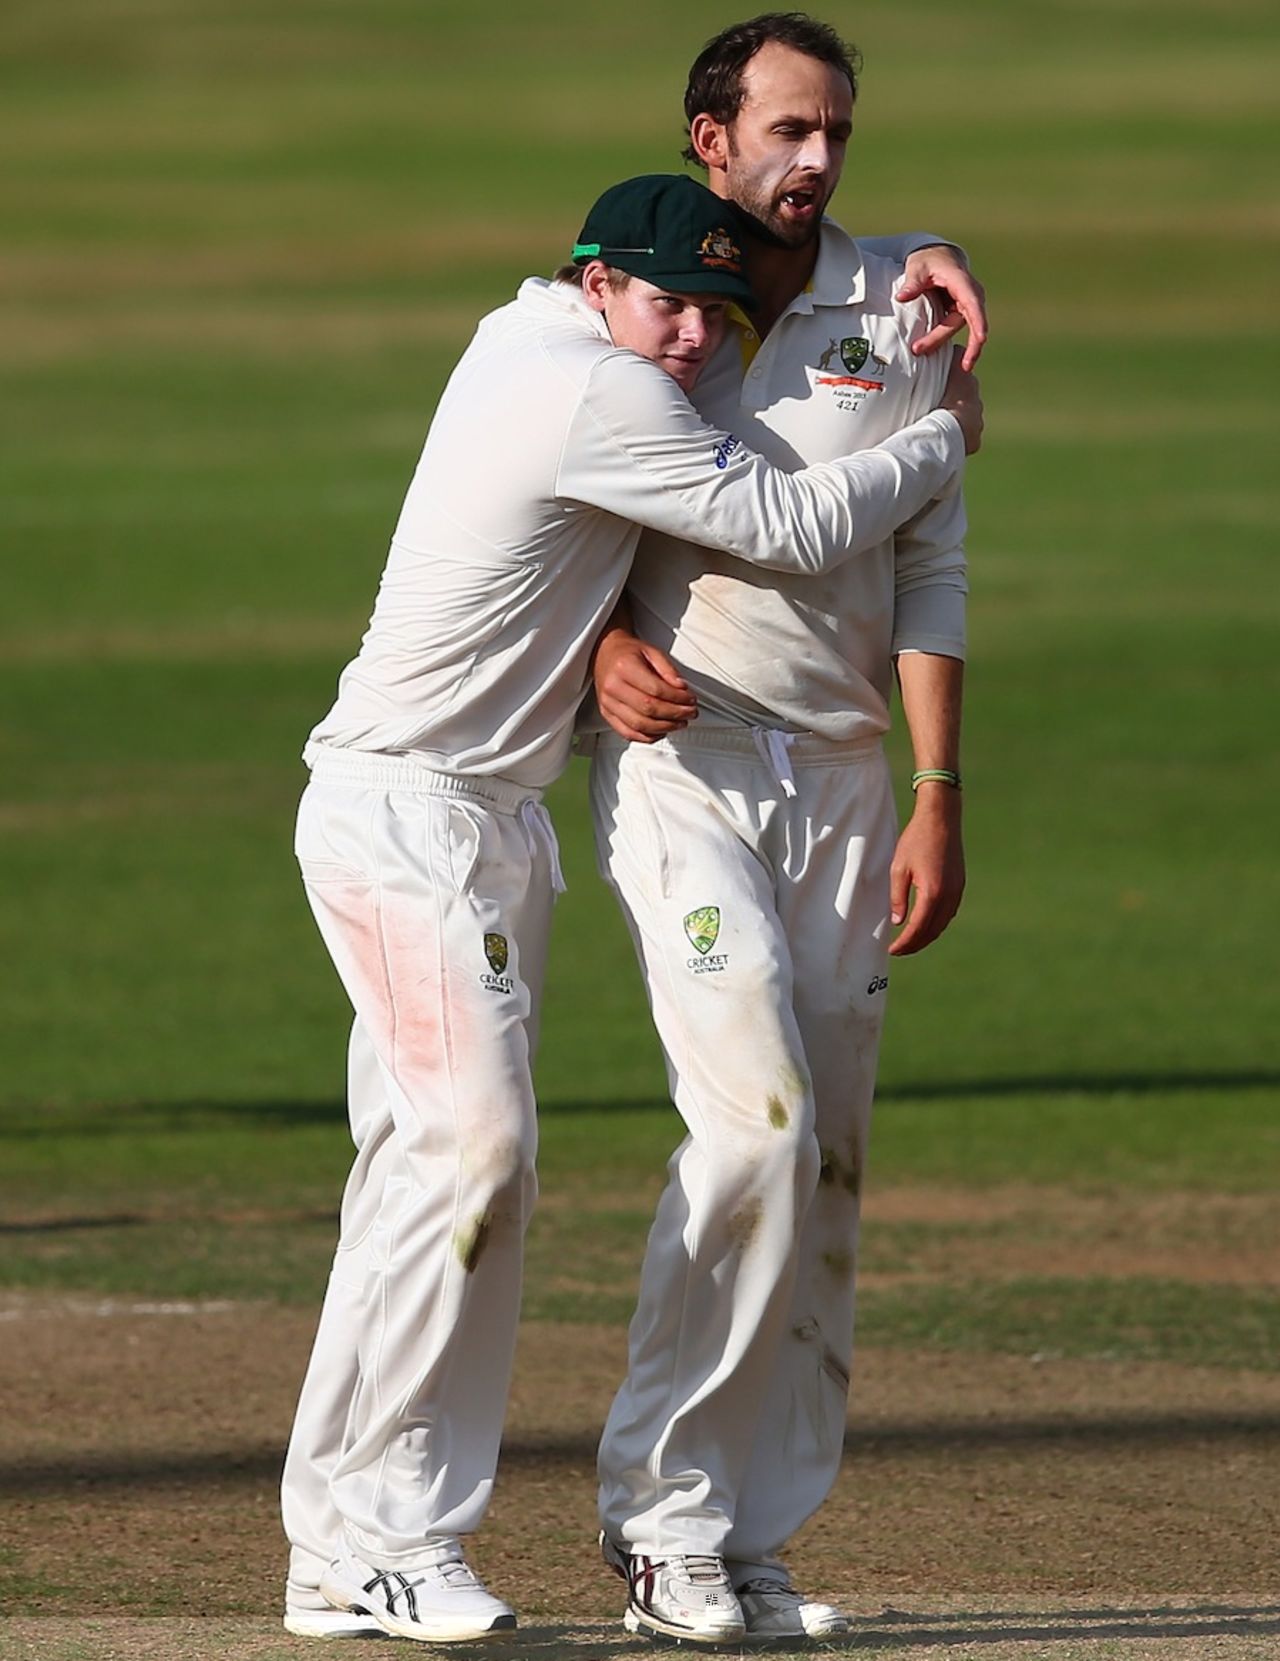 Nathan Lyon gets a hug from Steven Smith after claiming a wicket, England Lions v Australians, day 1, County Ground, Northampton, August 16, 2013